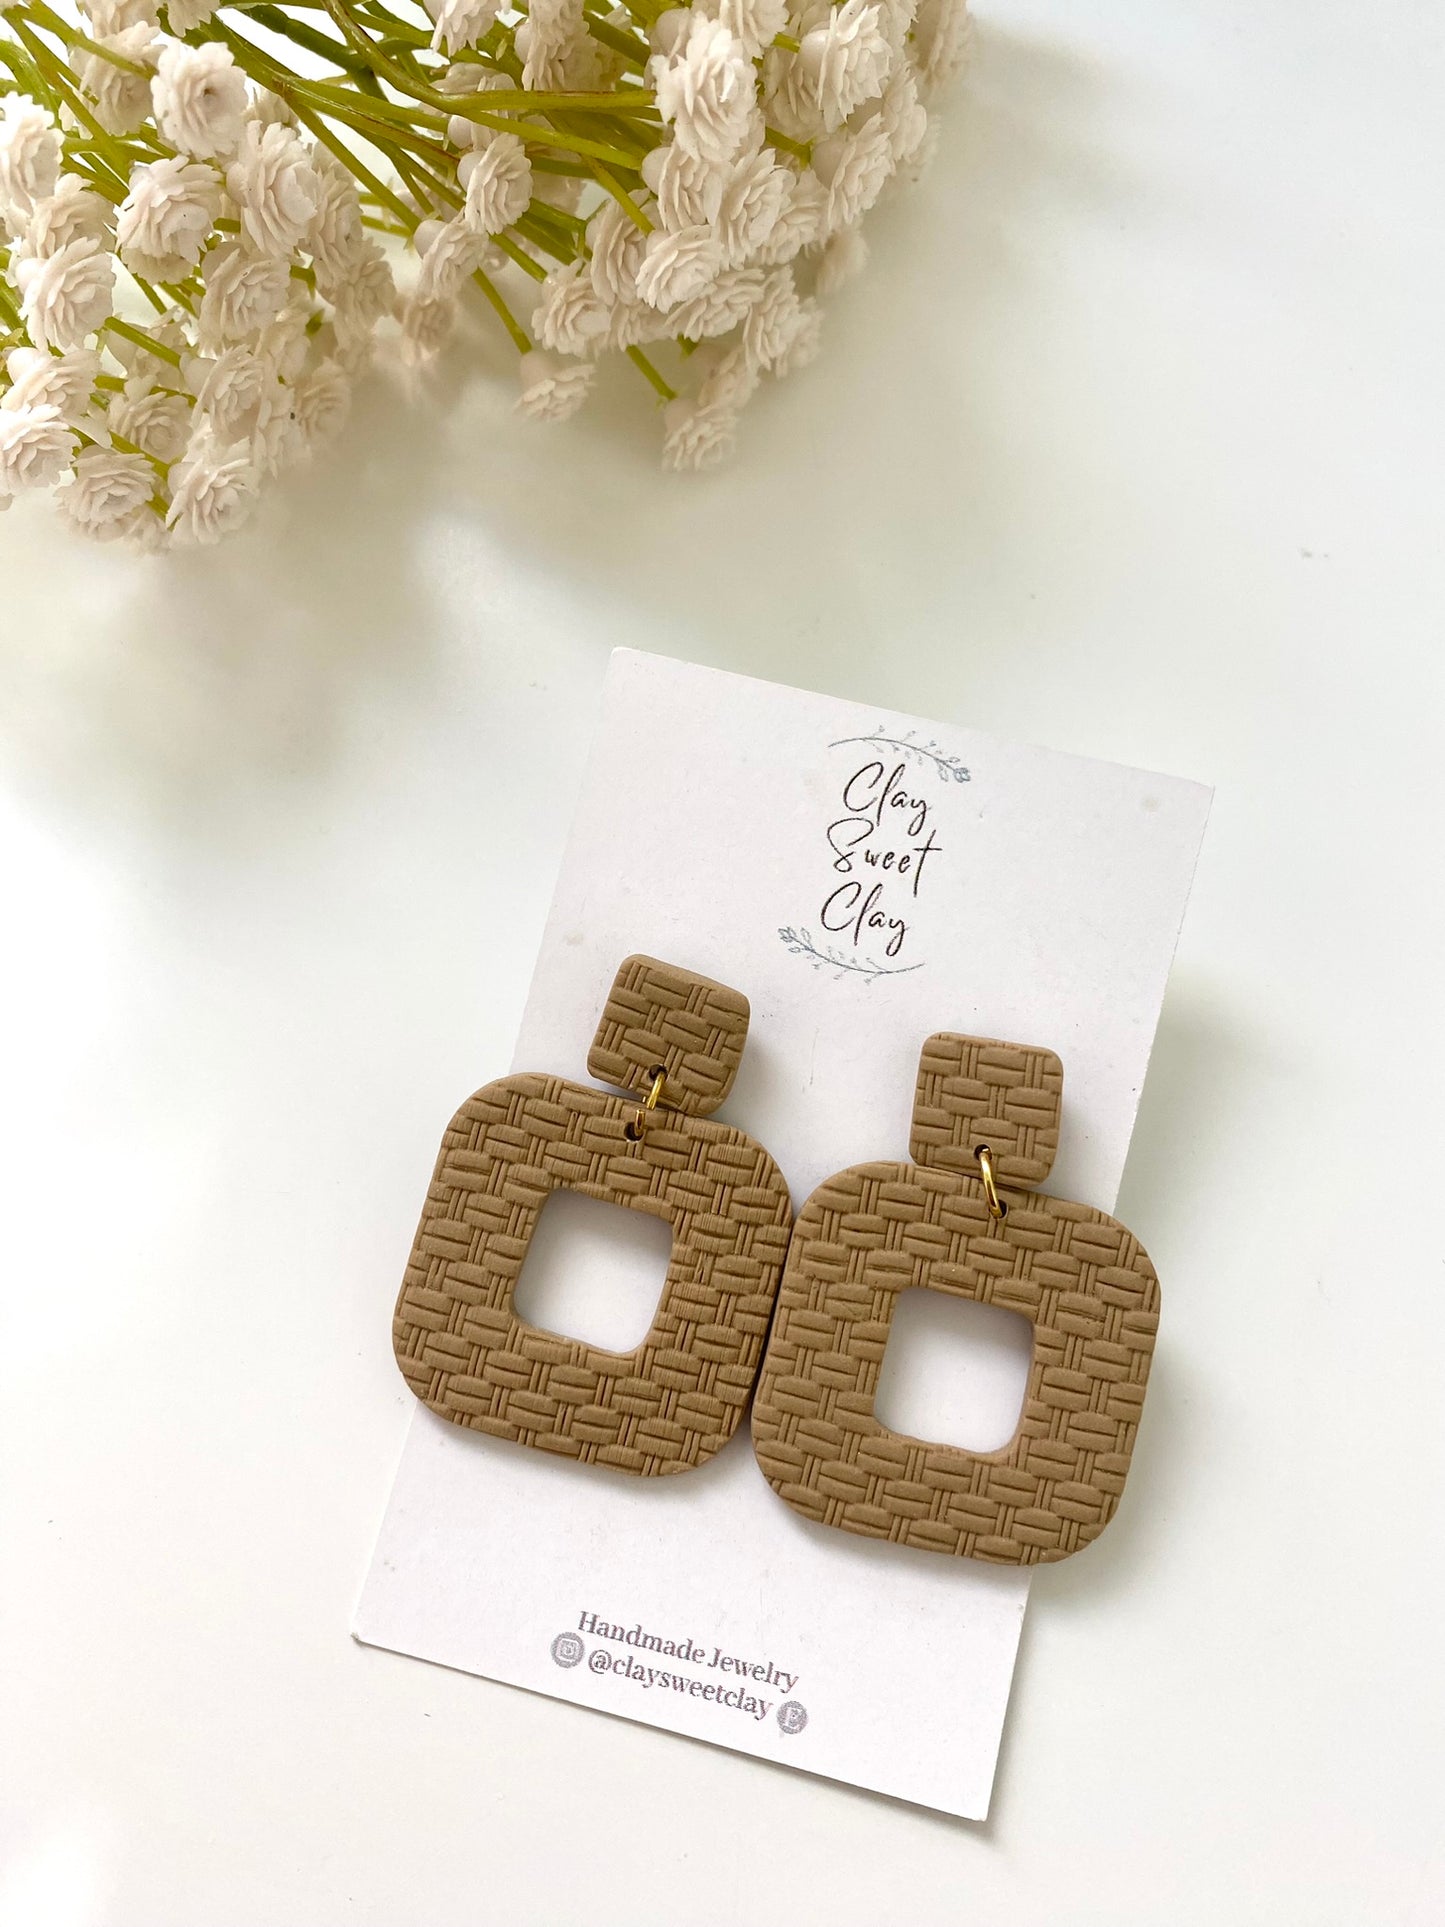 Basket Weave Textured Clay Earrings - Hollow Square